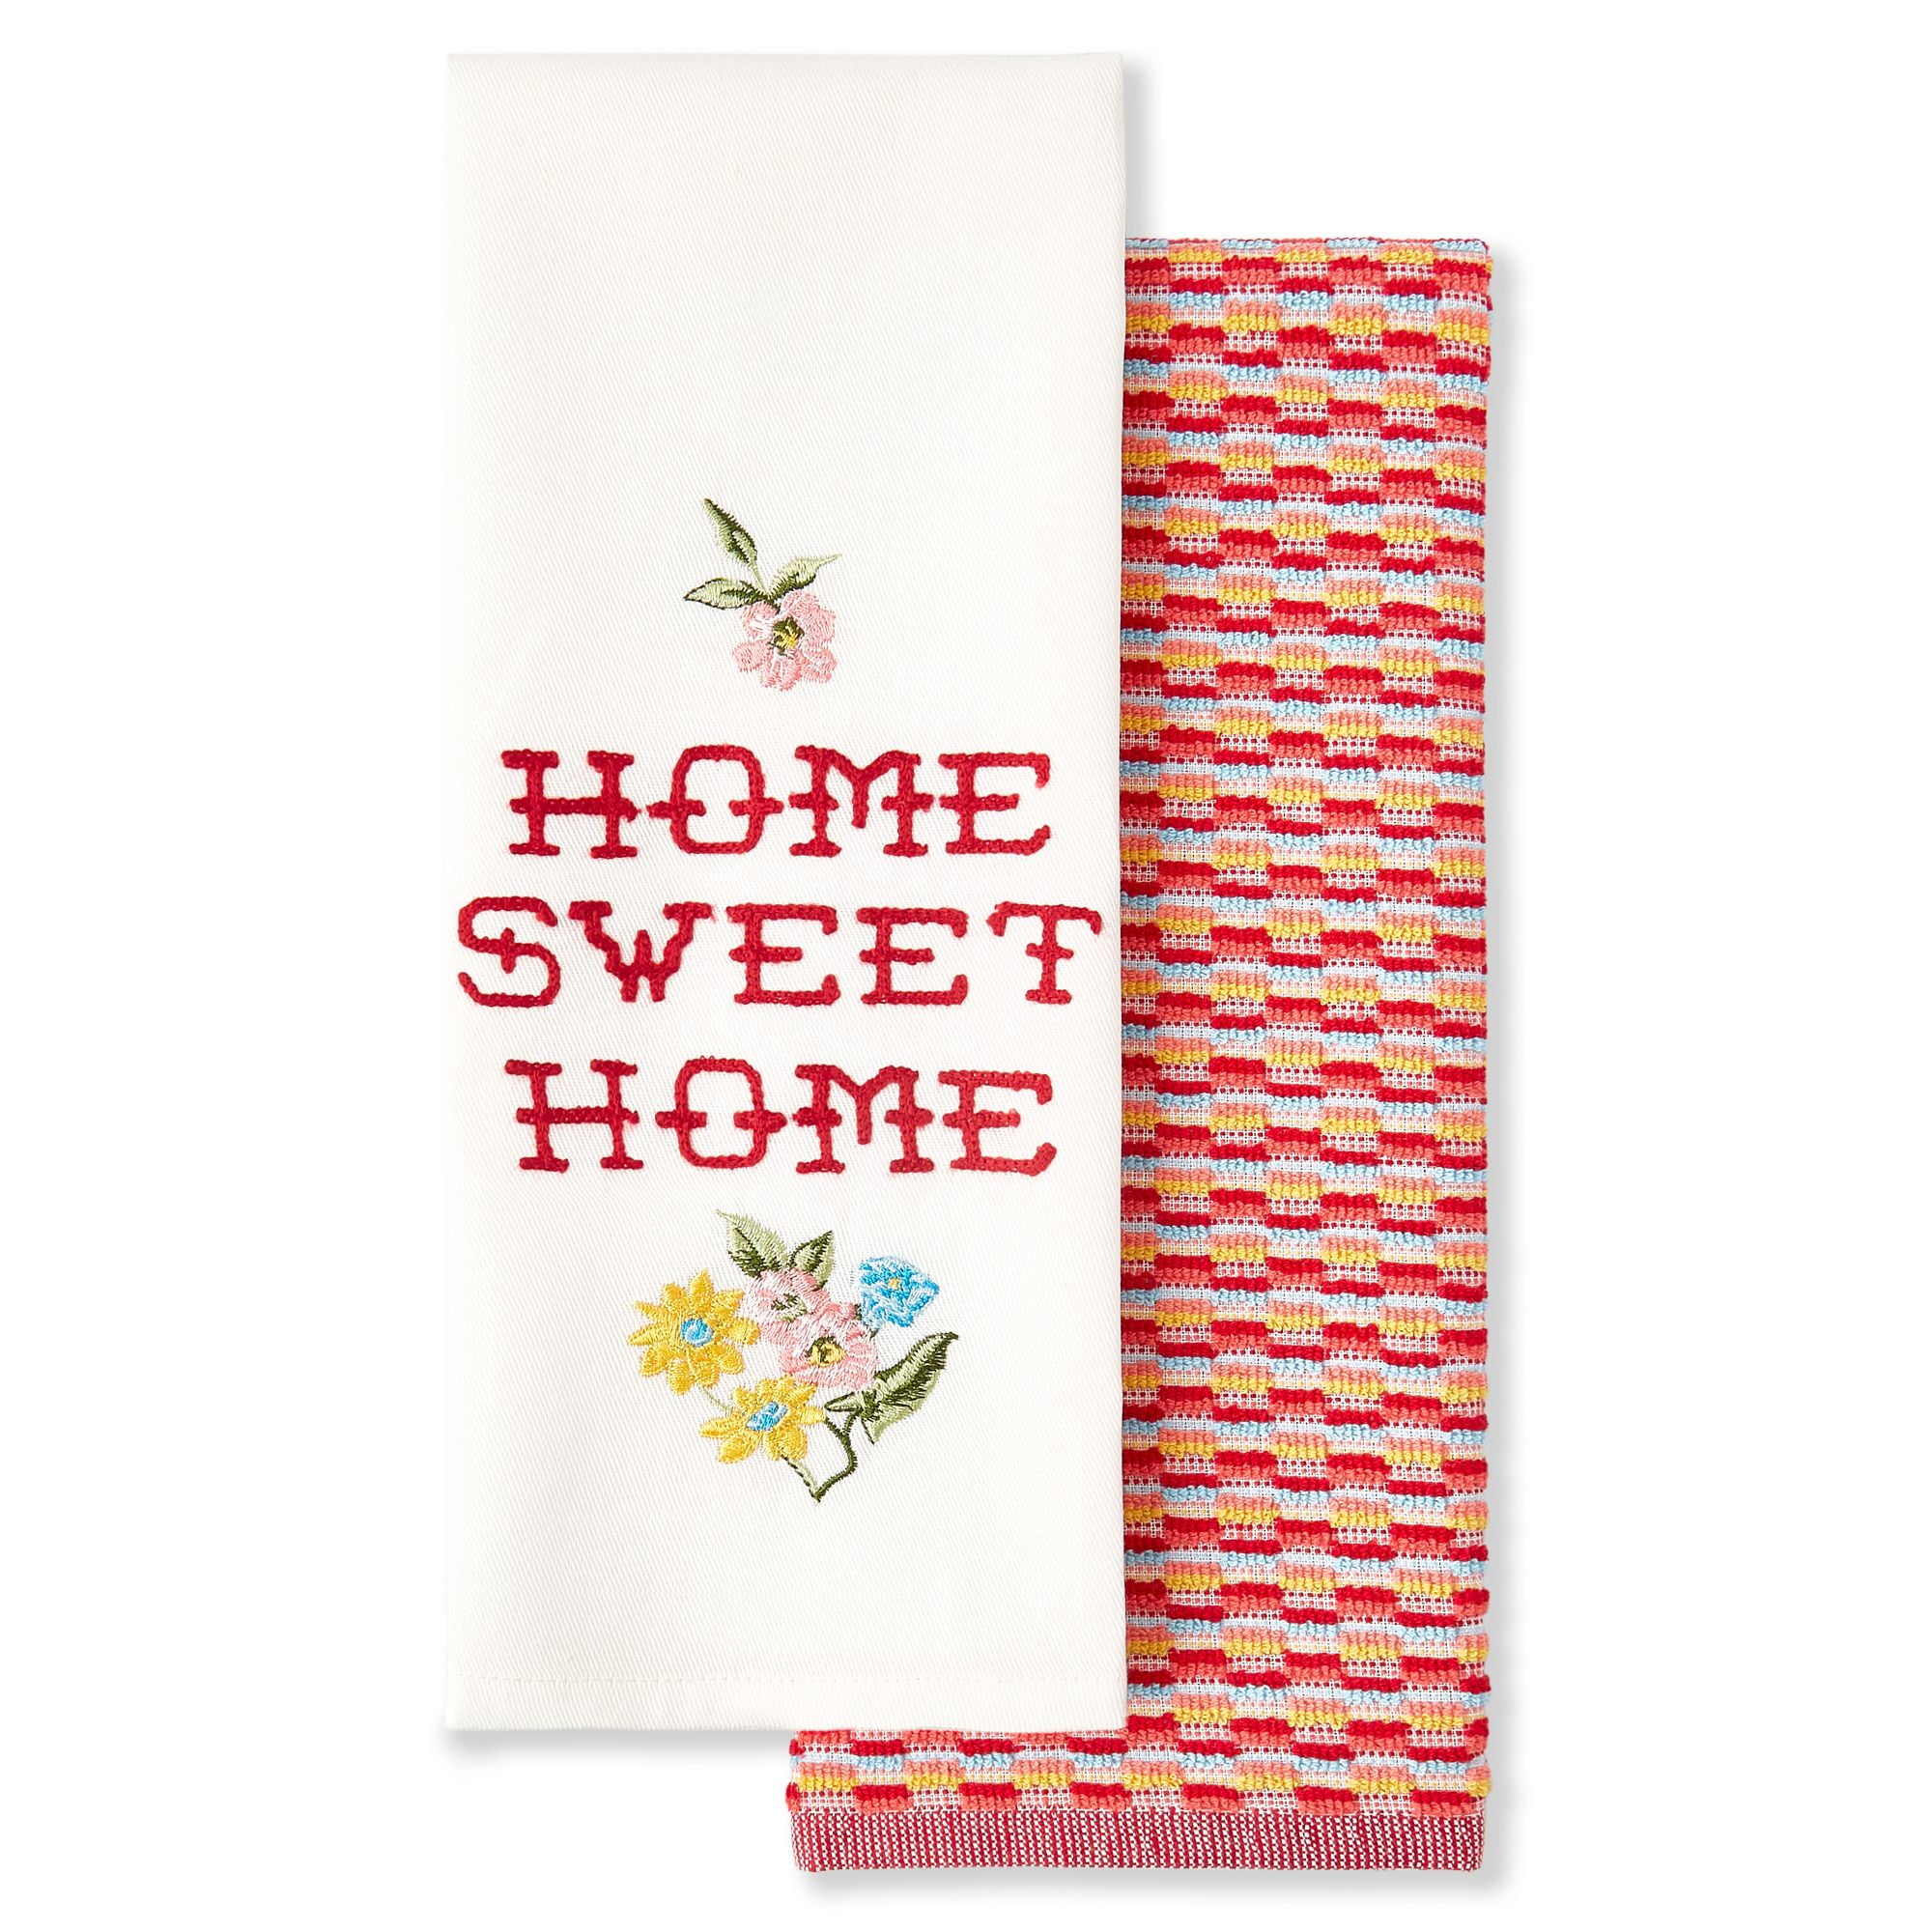 THE PIONEER WOMAN  HOME SWEET HOME DESIGN  KITCHEN TOWEL SET OF 2 TOWELS 